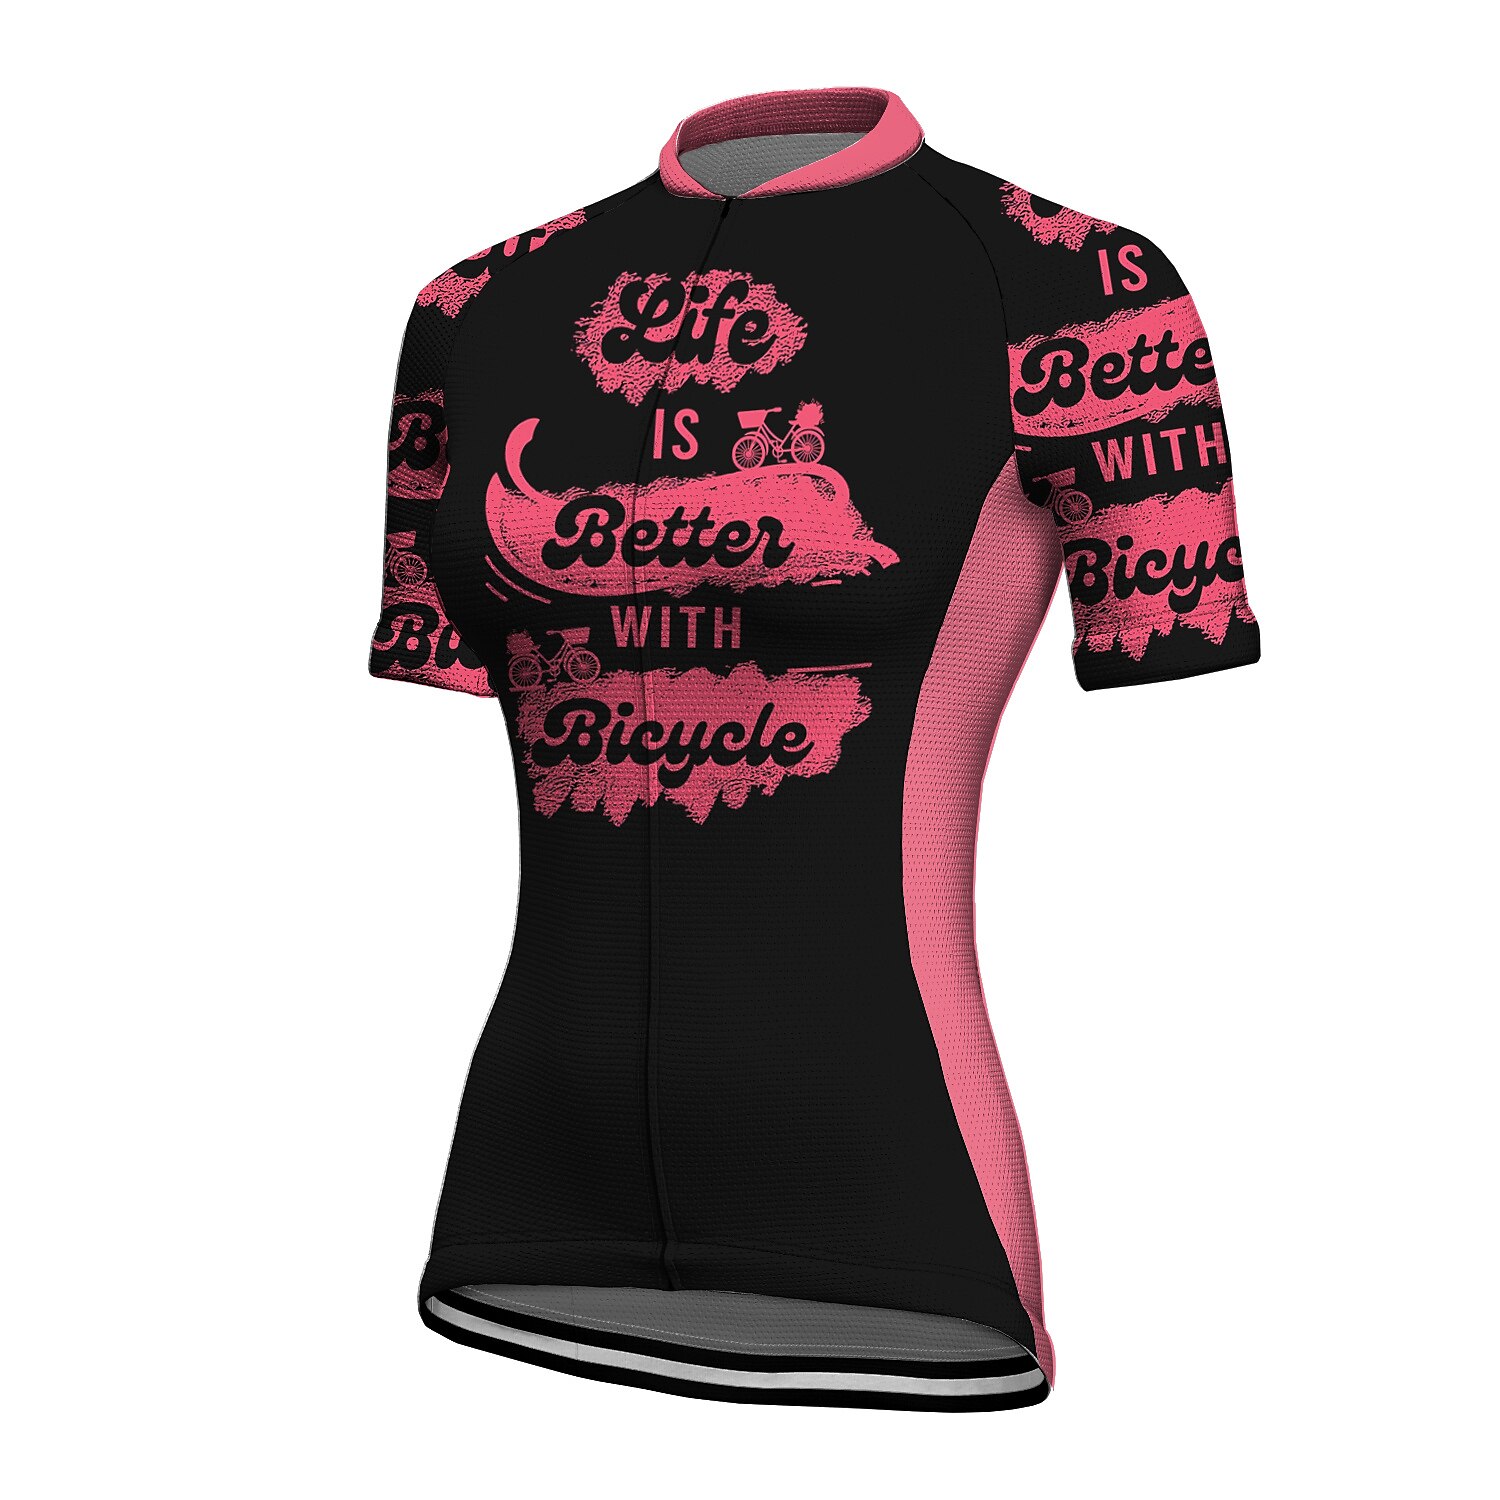 Cycling Jersey Women Skull Short Sleeve Bike Shirt Quick-Dry Breathable Reflective S-2XL Tops 